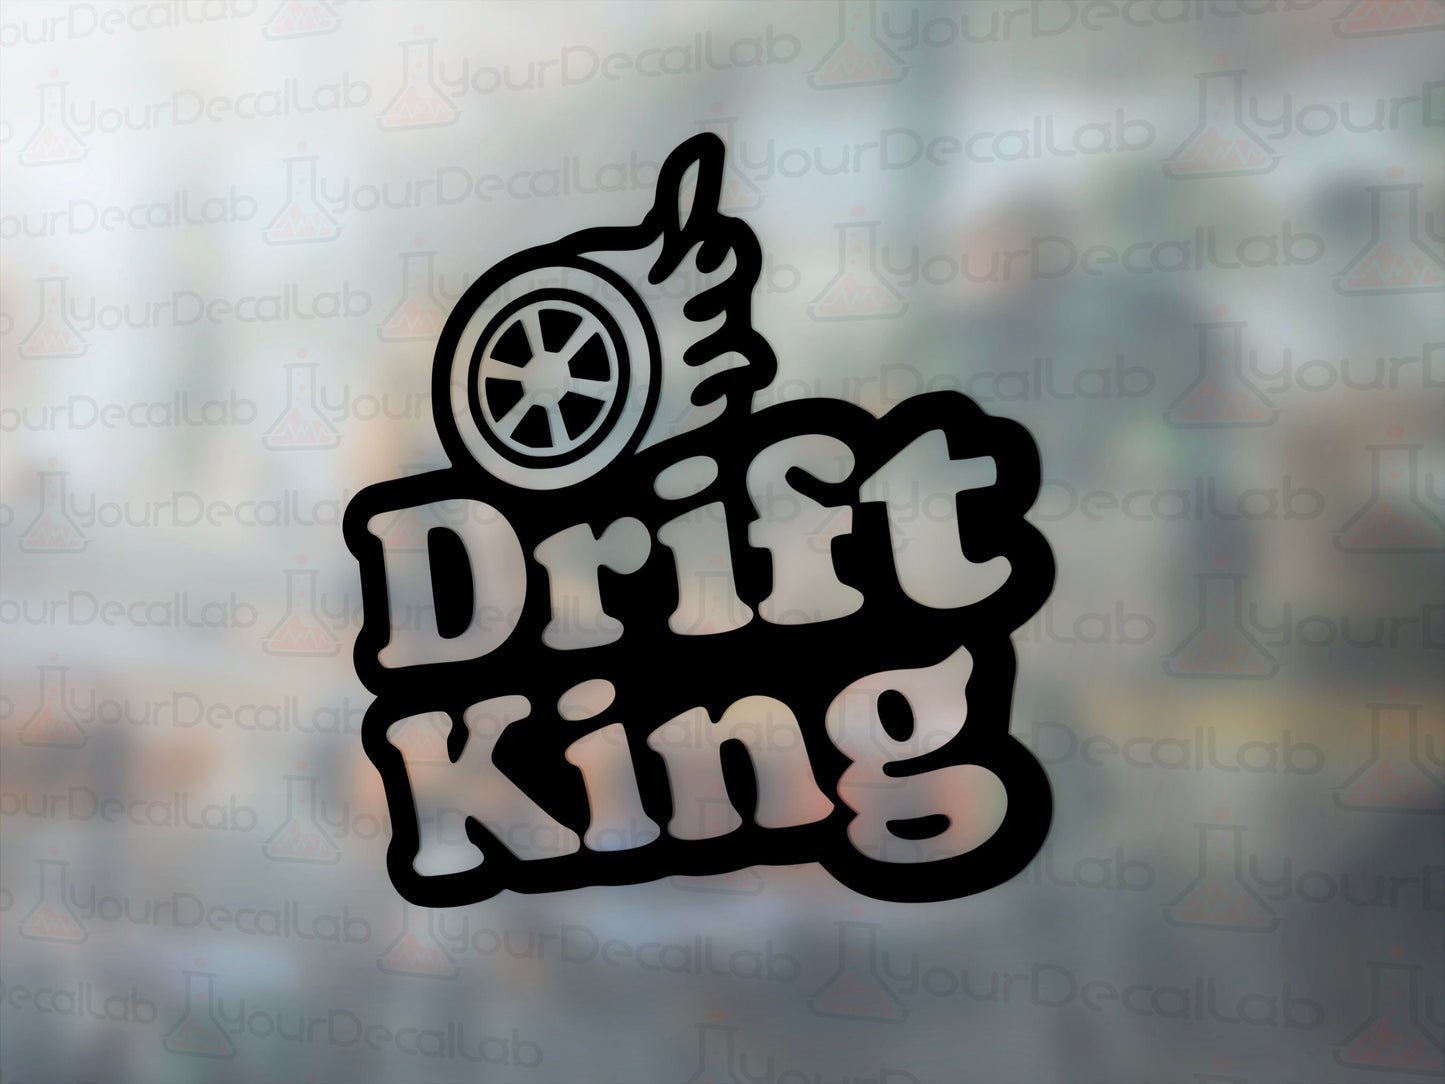 Drift King Decal - Many Colors & Sizes